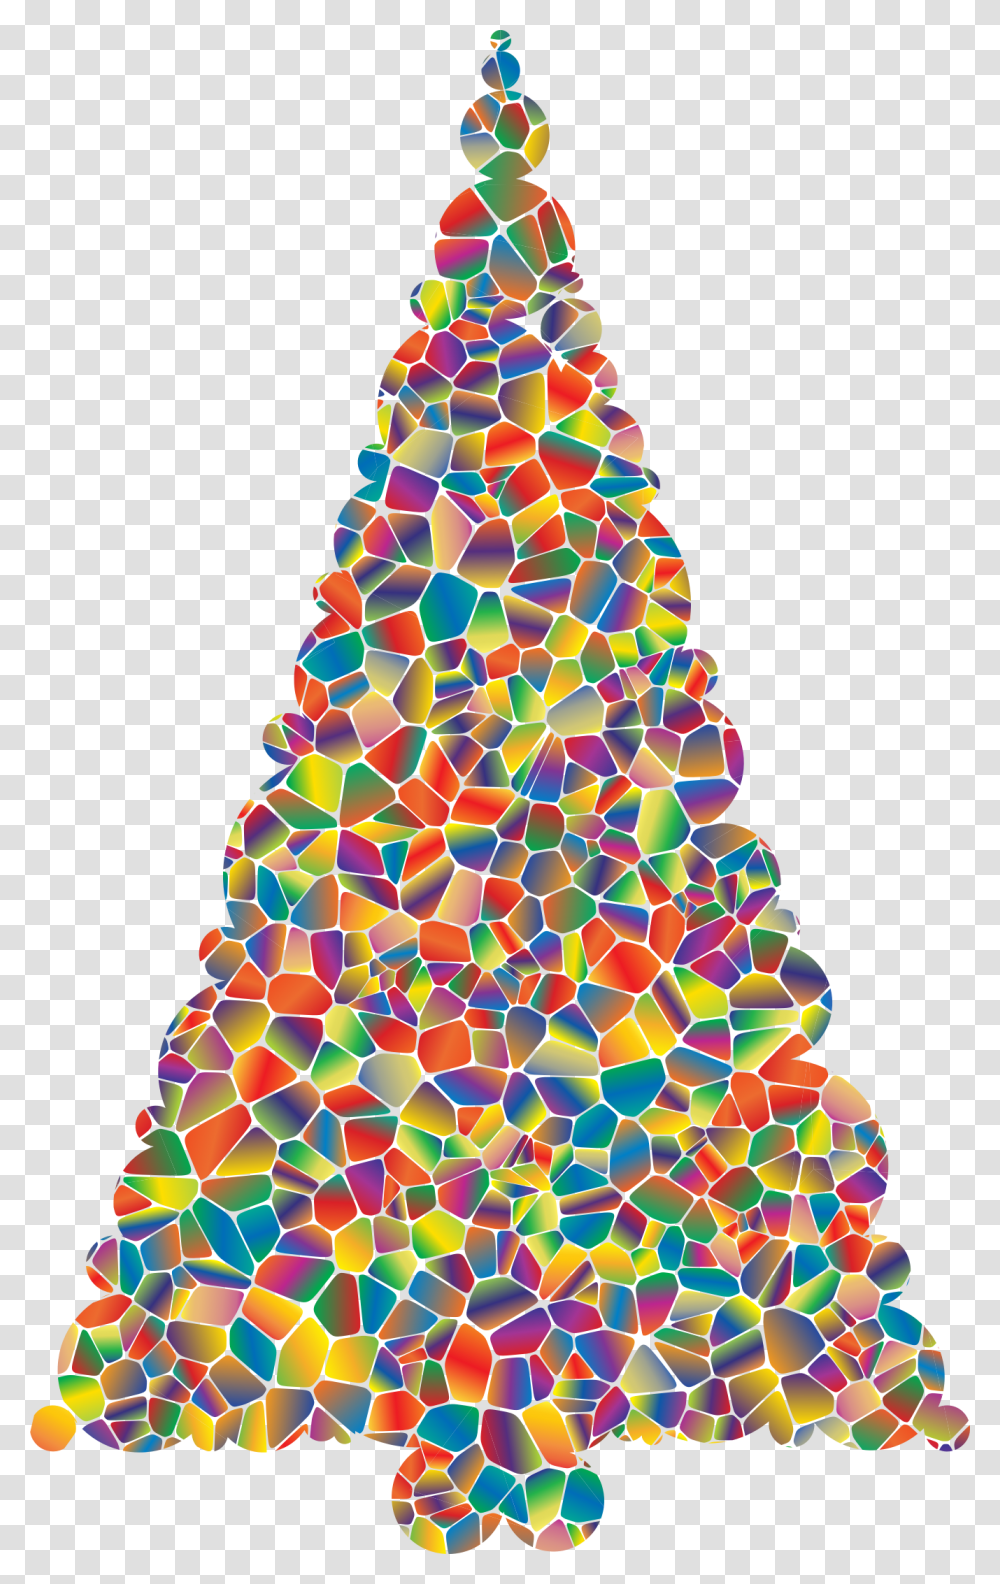 Polyprismatic Tiled Christmas Tree Clip Arts Tiled Christmas Tree, Plant, Ornament Transparent Png